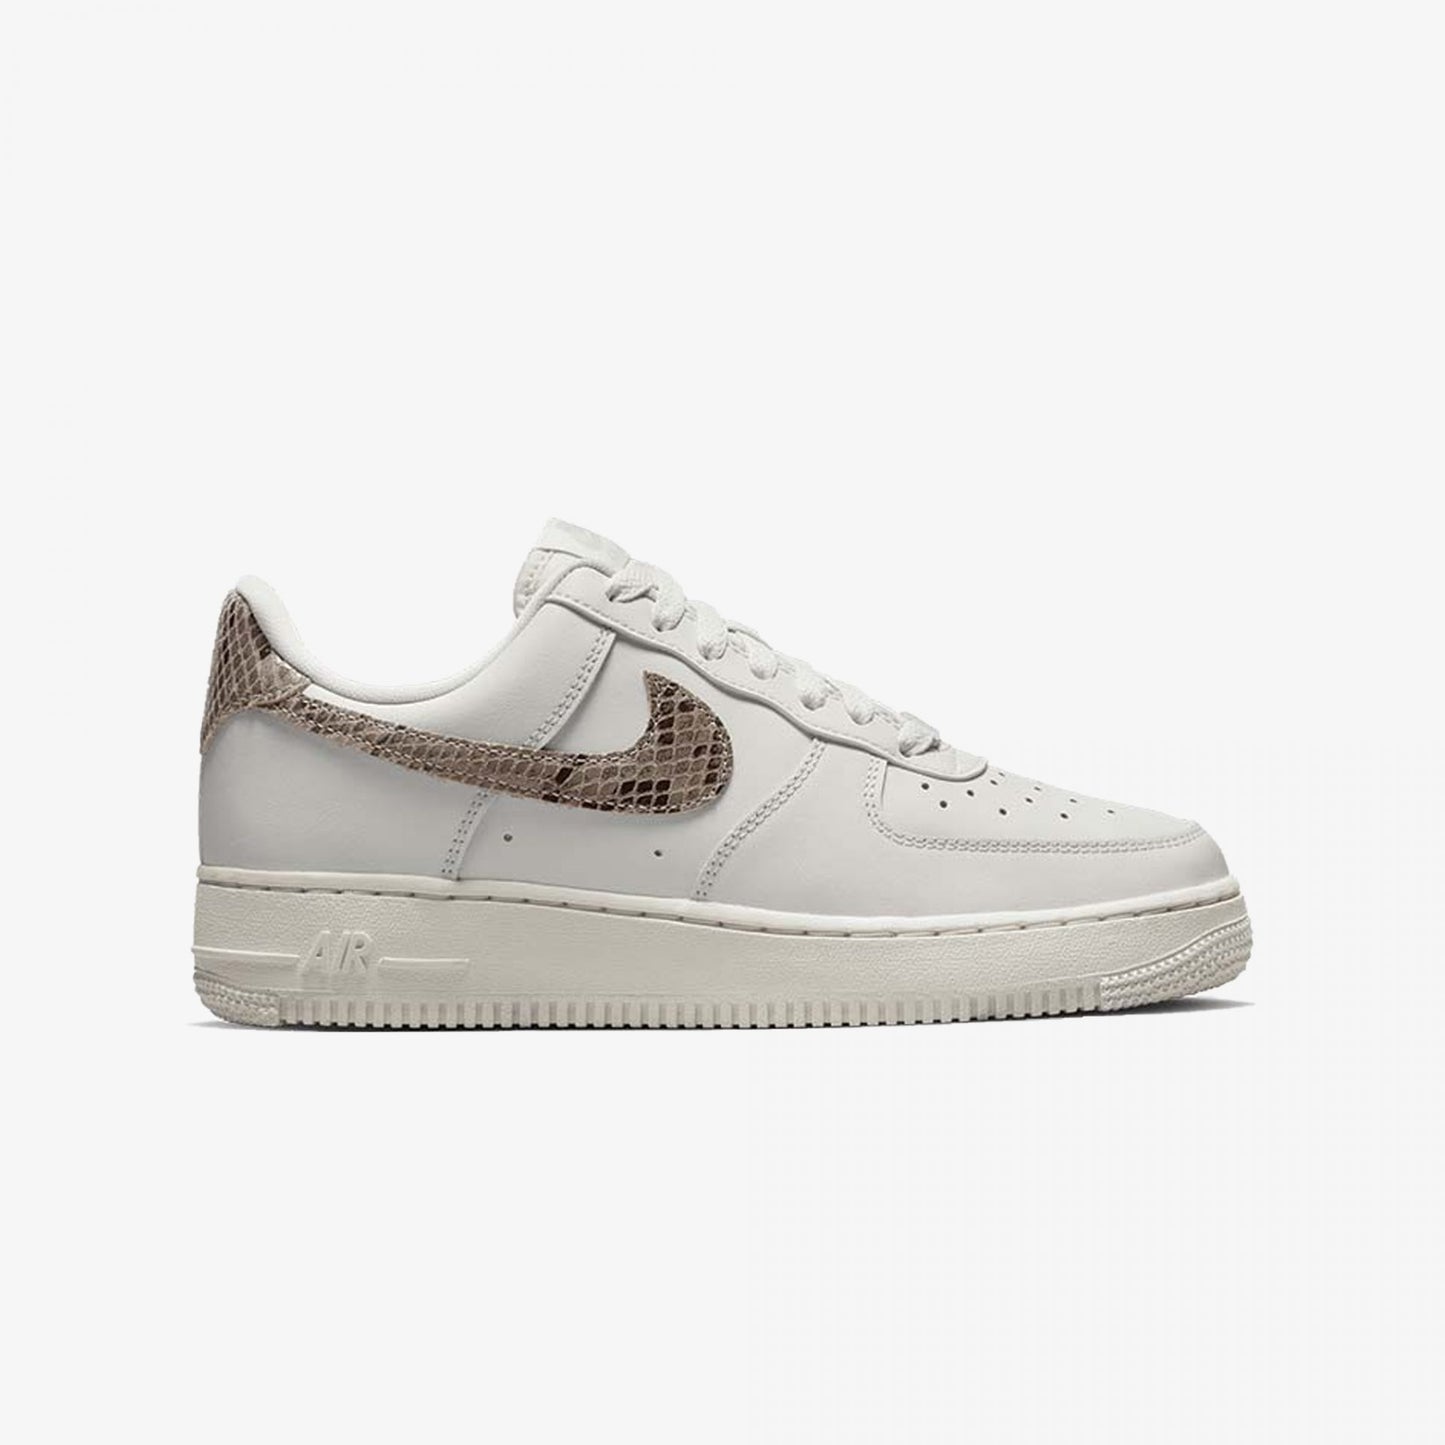 WMN'S AIR FORCE 1 '07 'GREY/WHITE'